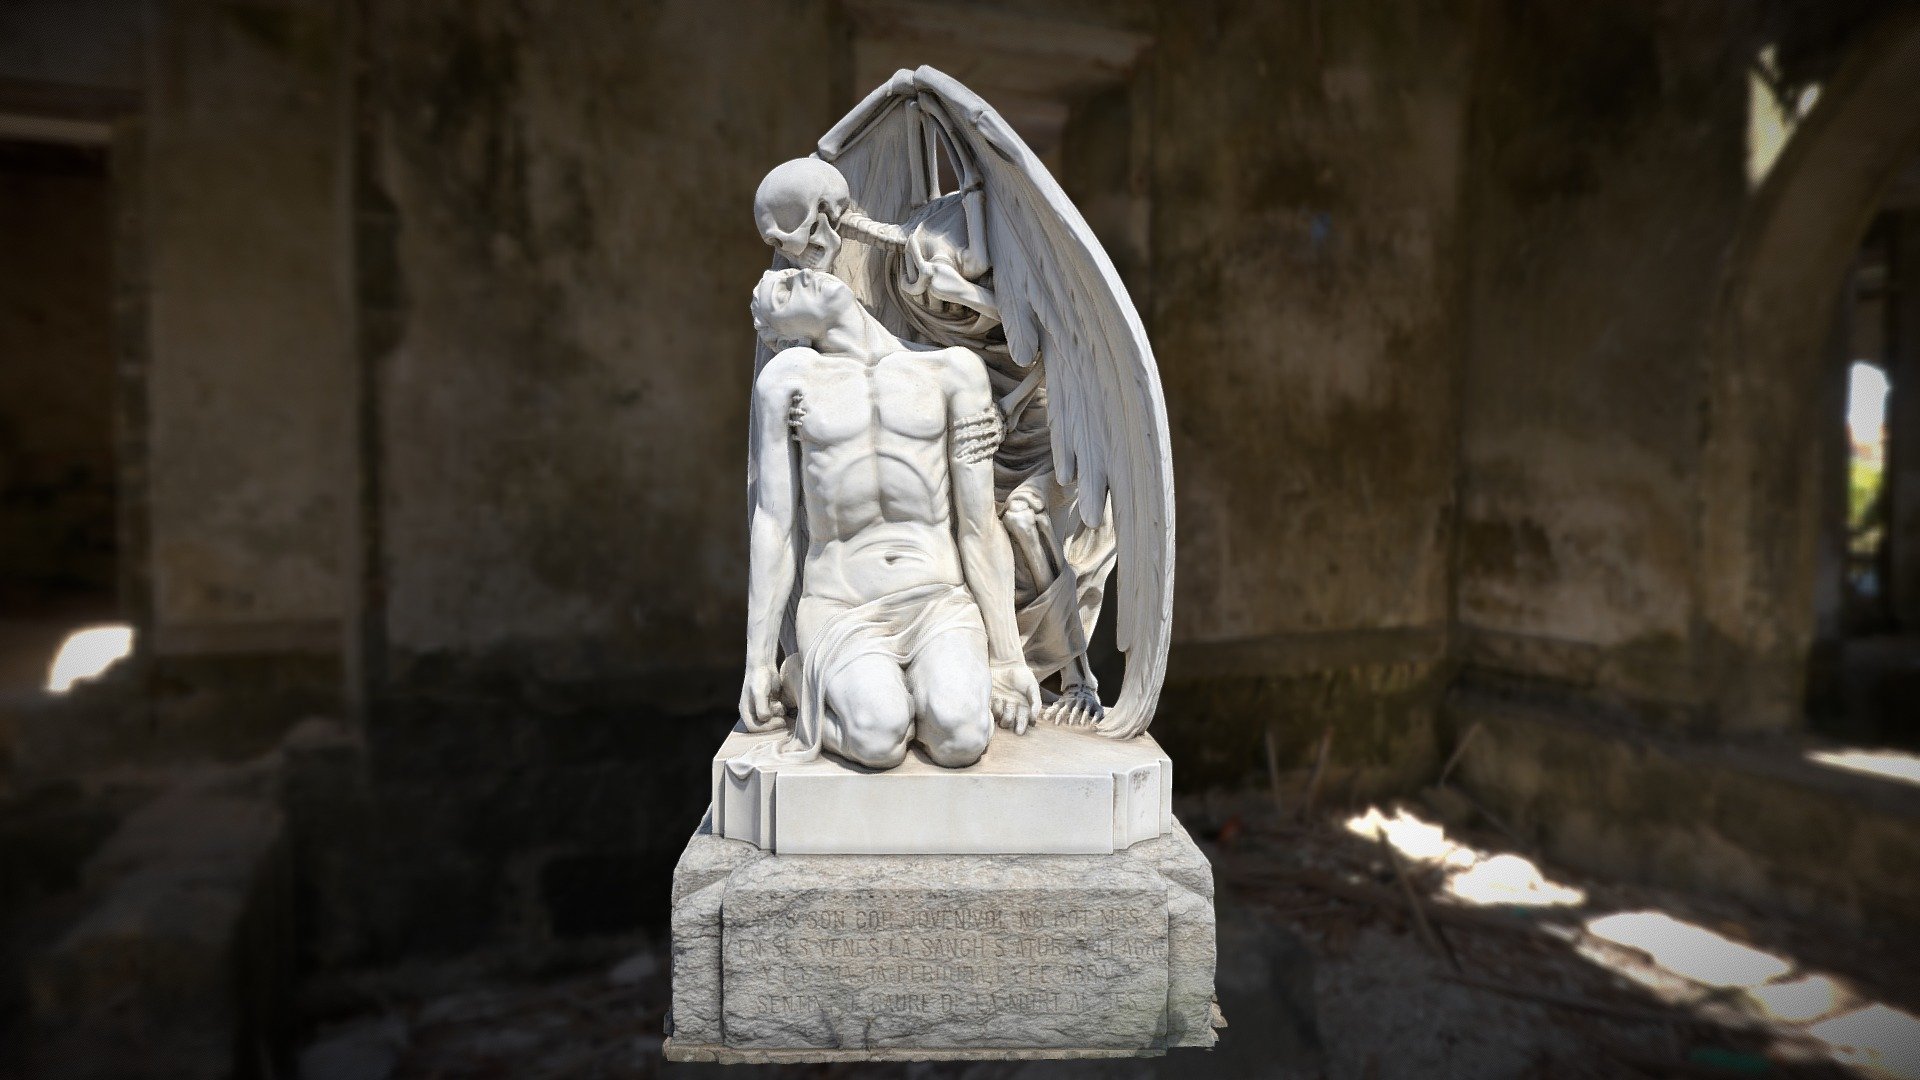 A lifelike marble statue of the kiss of death depicting an angel carrying a woman's soul to heaven, located in Poblenou Cemetery in Barcelona Spain. The statue was designed by Joan Fontbernat and sculpted by Jaume Barba’s workshop in 1930 - Kiss Of Death - 3D model by Soulbank 3d model